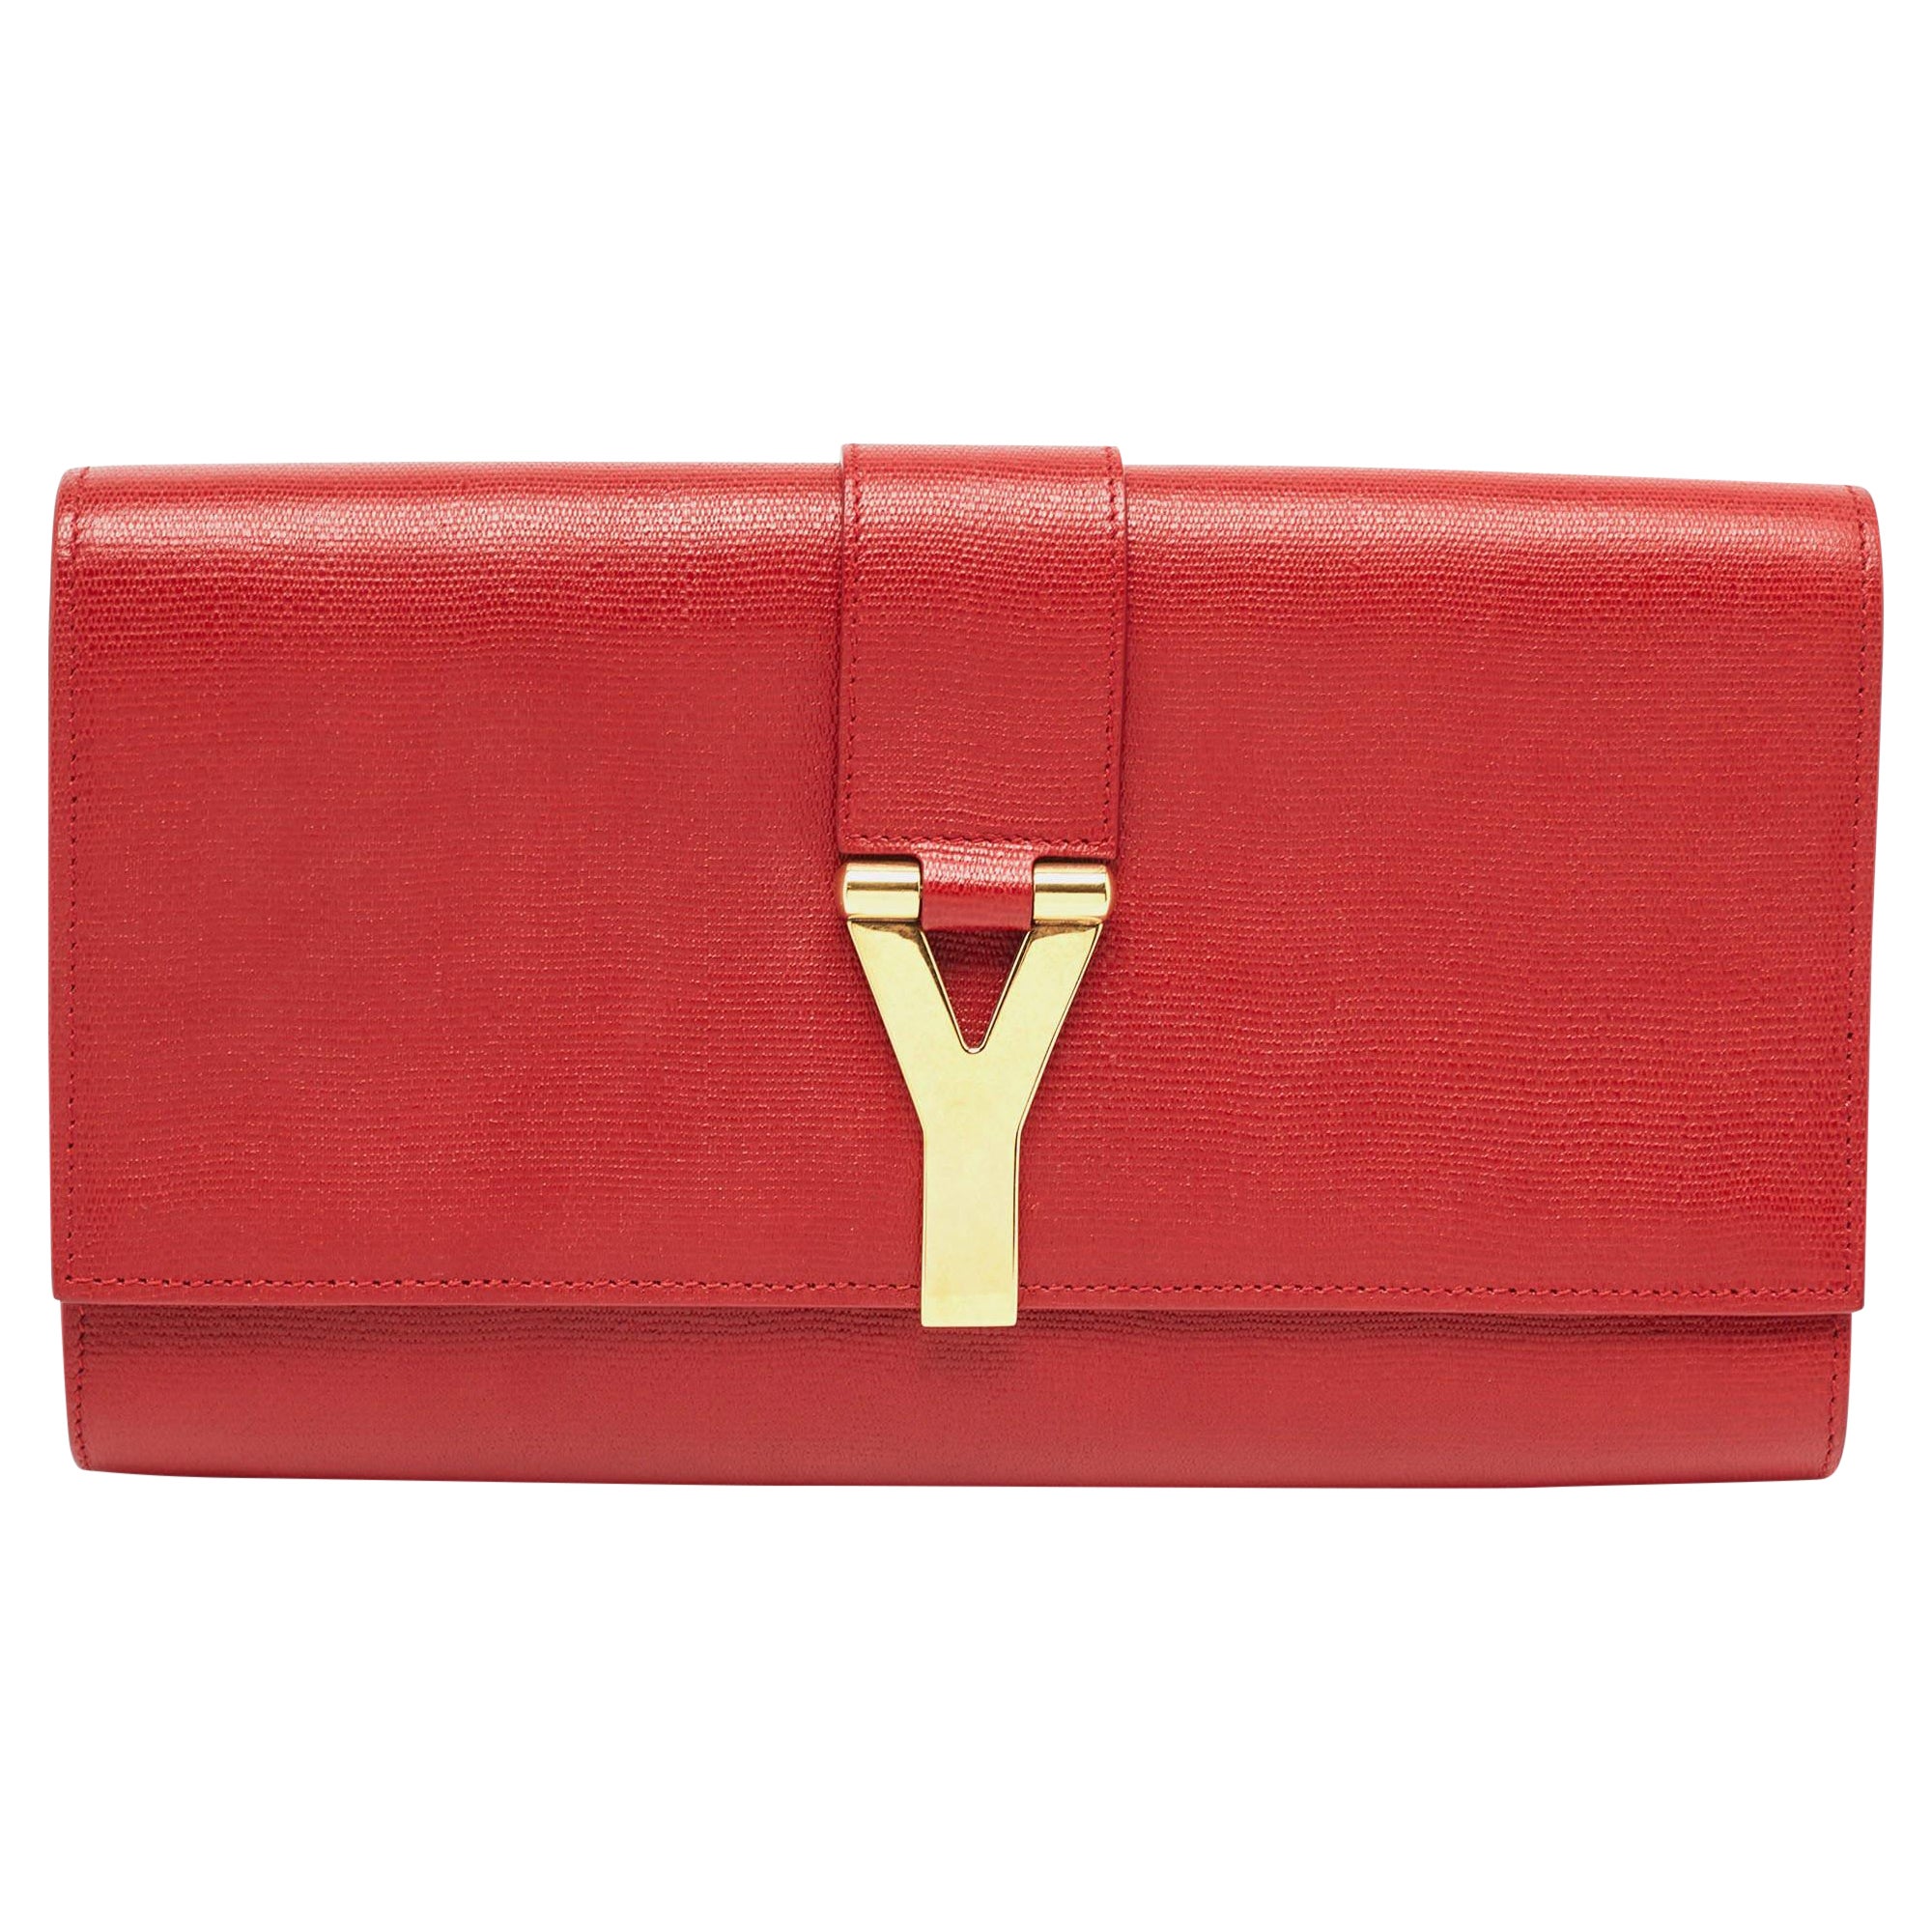 Yves Saint Laurent Red Leather Y-Ligne Clutch For Sale